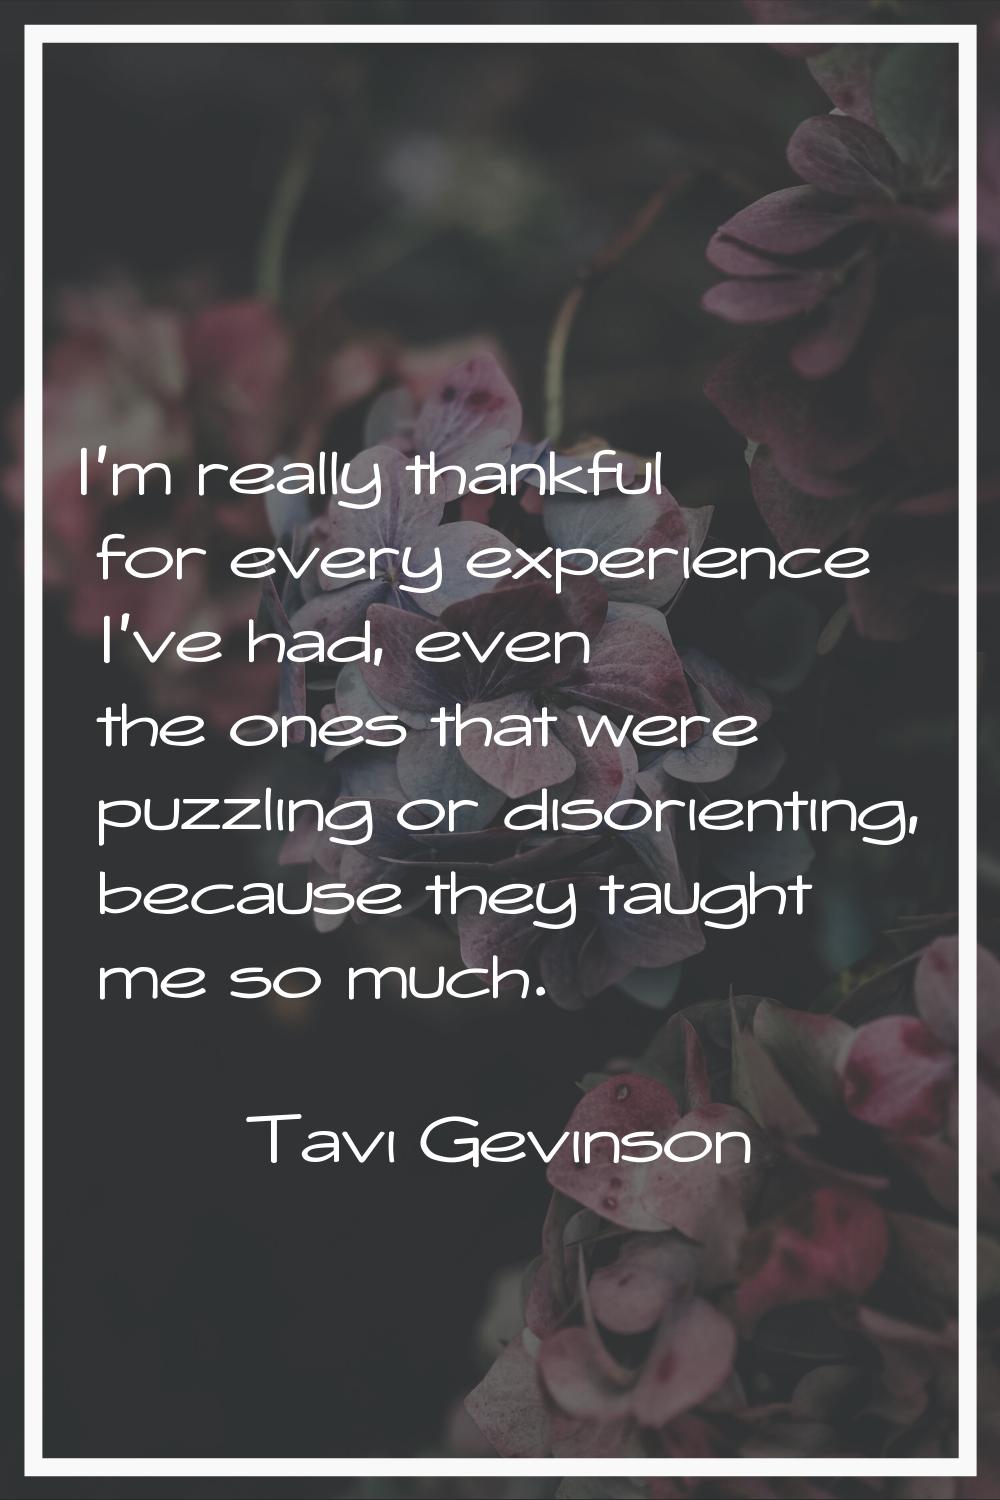 I'm really thankful for every experience I've had, even the ones that were puzzling or disorienting